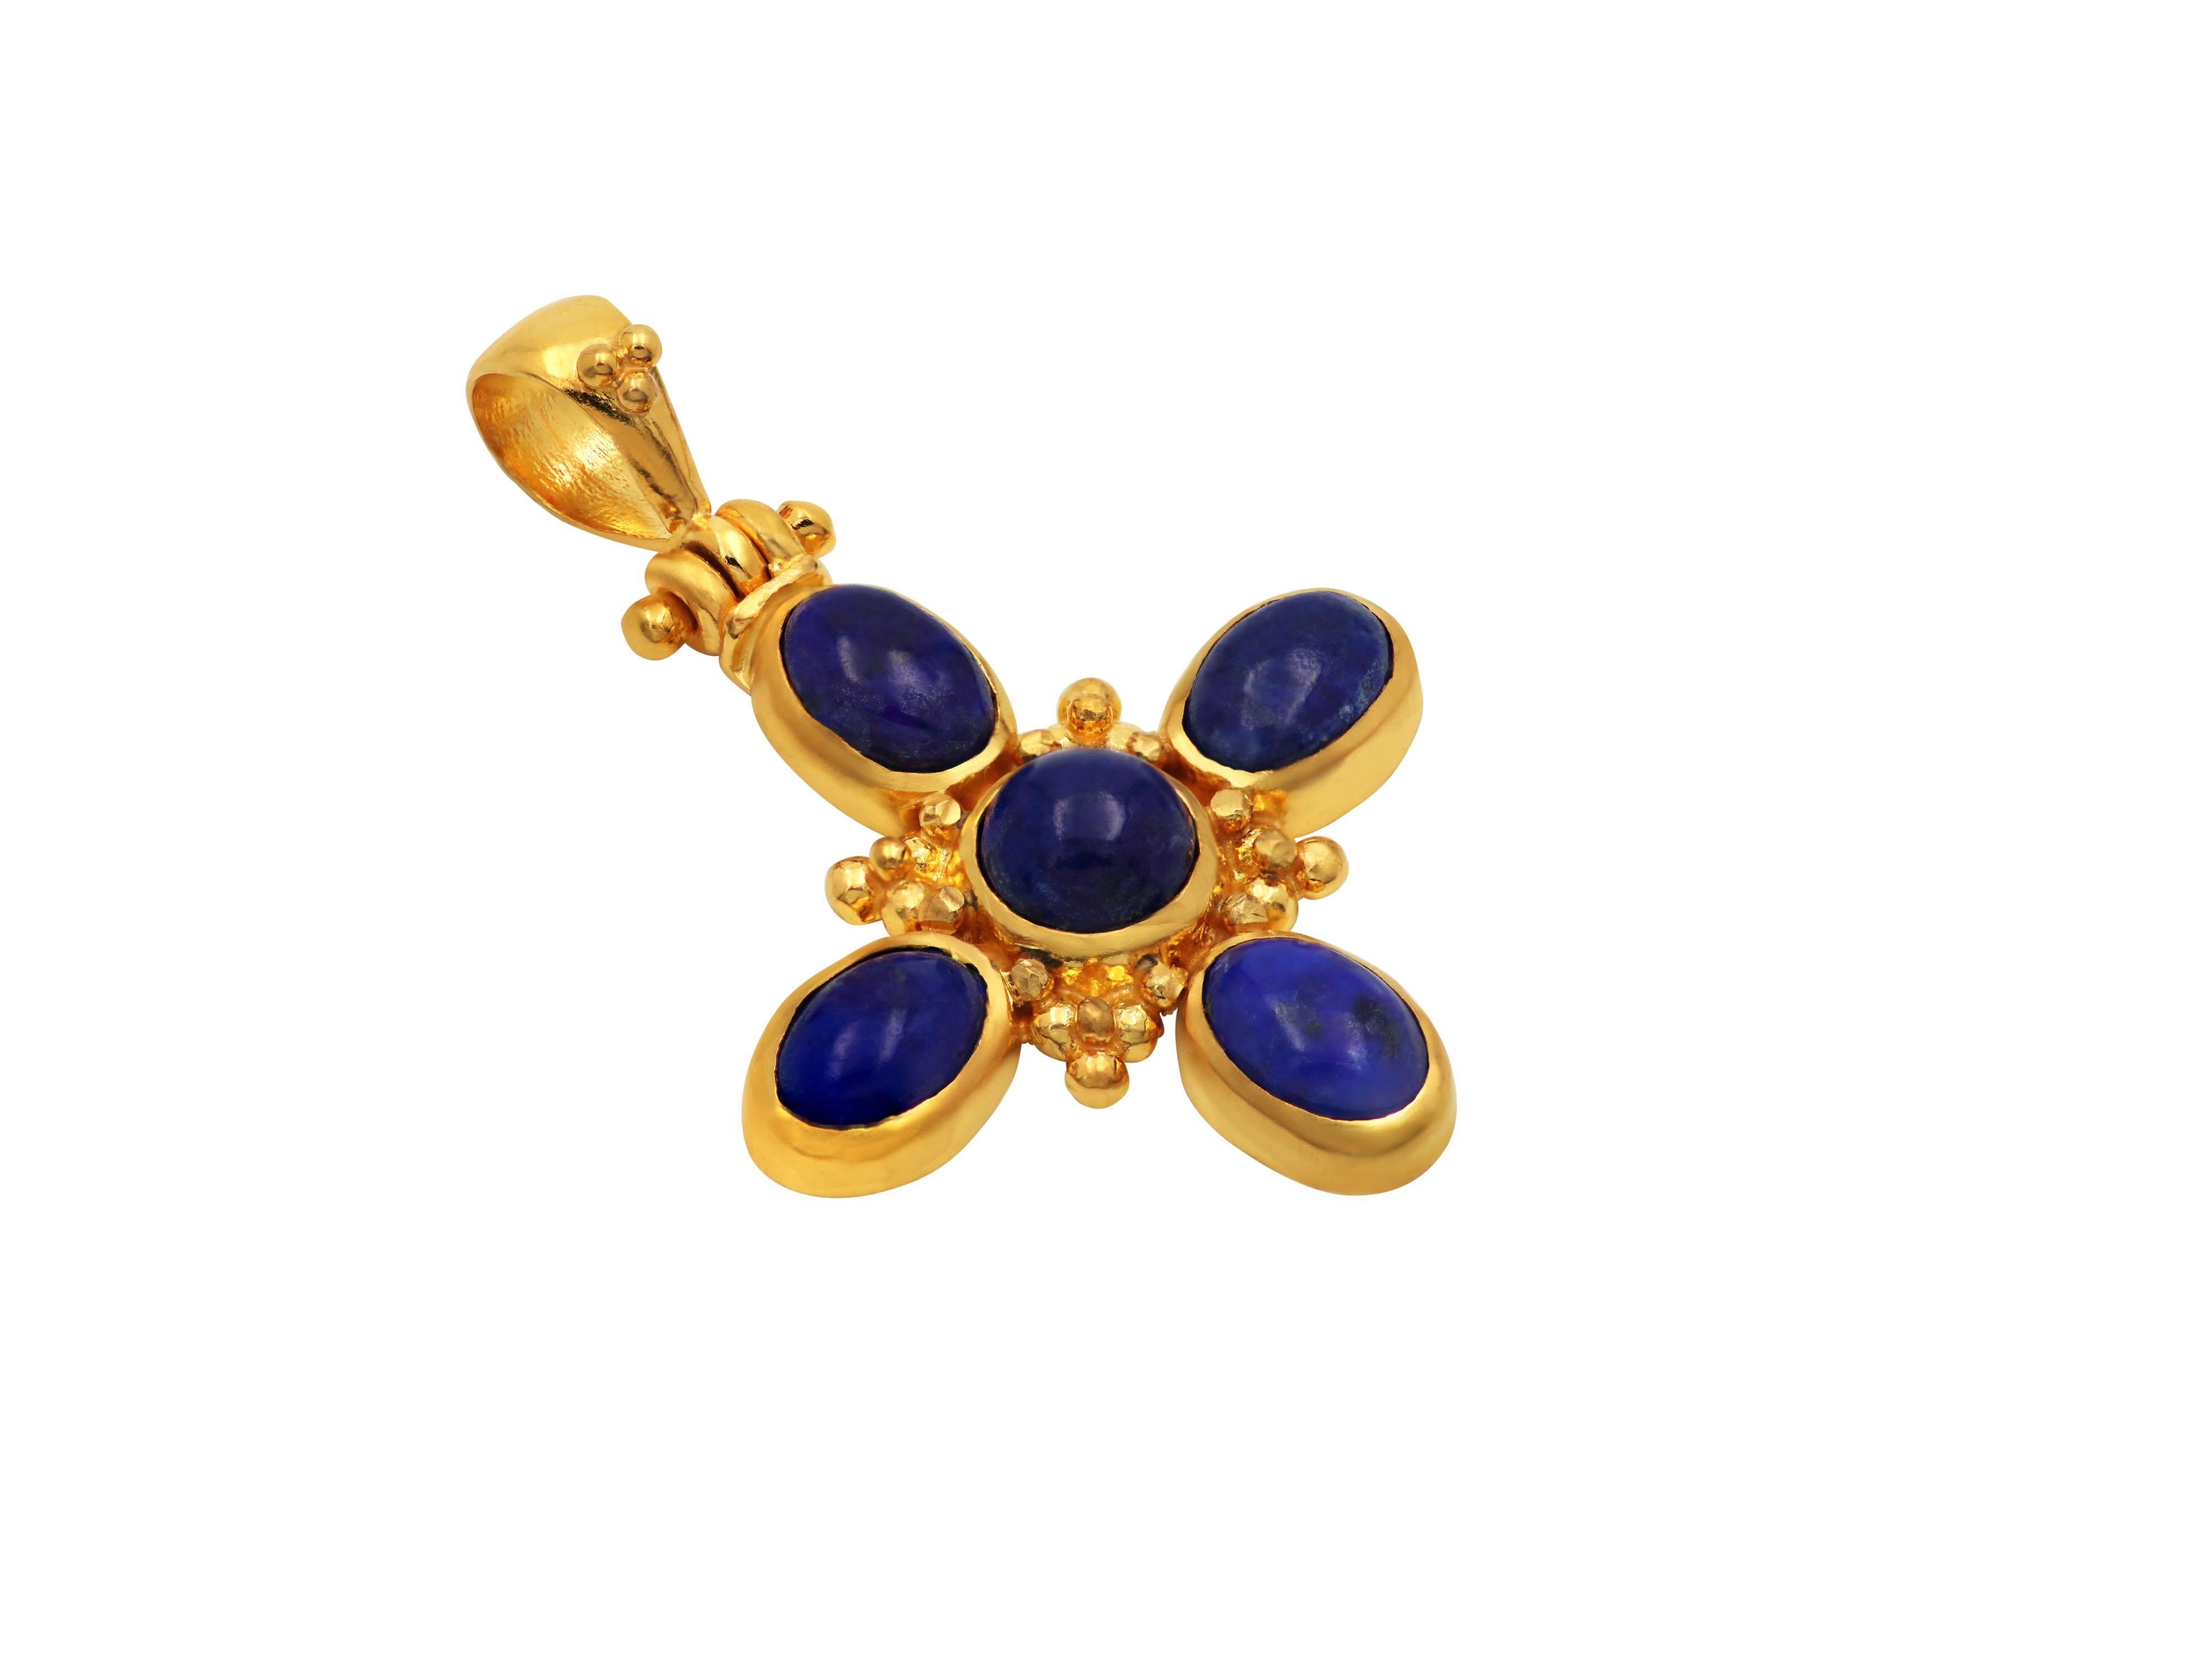 Classic cross completely handmade in the old traditional way in 18 karats gold set with cabochon Lapis Lazuli and granulation decoration.